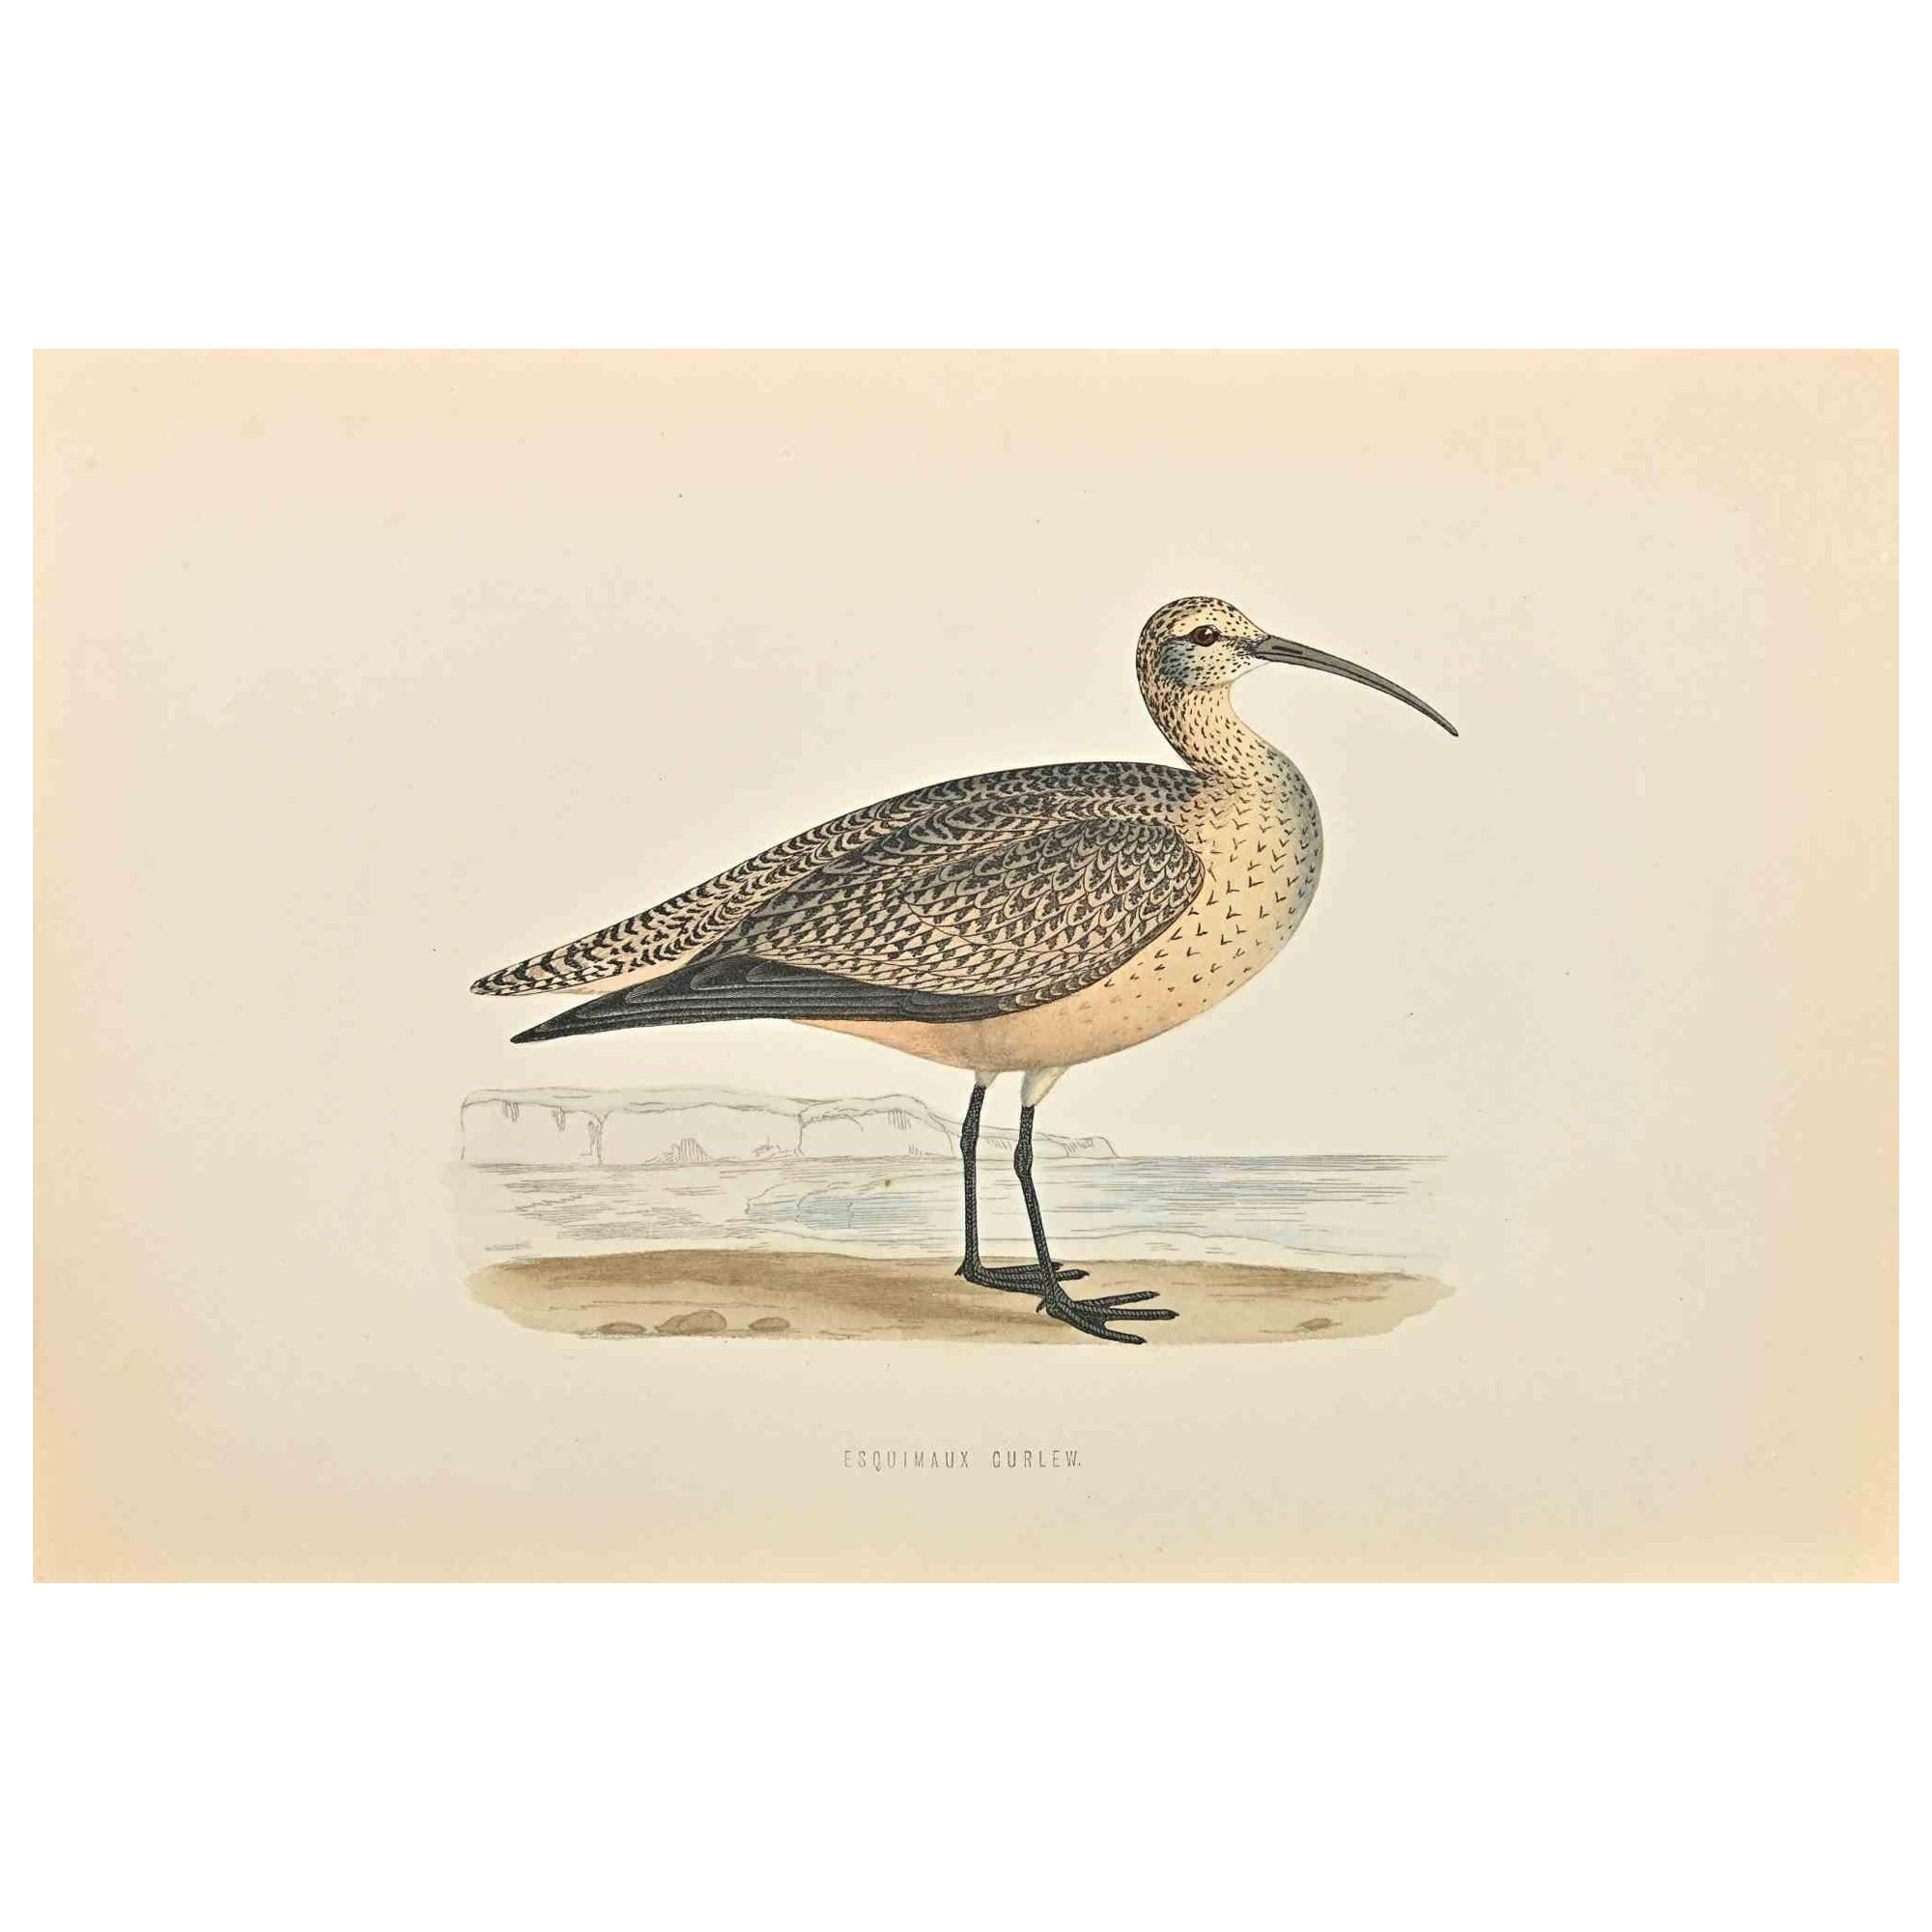 Esquimaux Curlew is a modern artwork realized in 1870 by the British artist Alexander Francis Lydon (1836-1917).

Woodcut print on ivory-colored paper.

Hand-colored, published by London, Bell & Sons, 1870.  

The name of the bird is printed on the